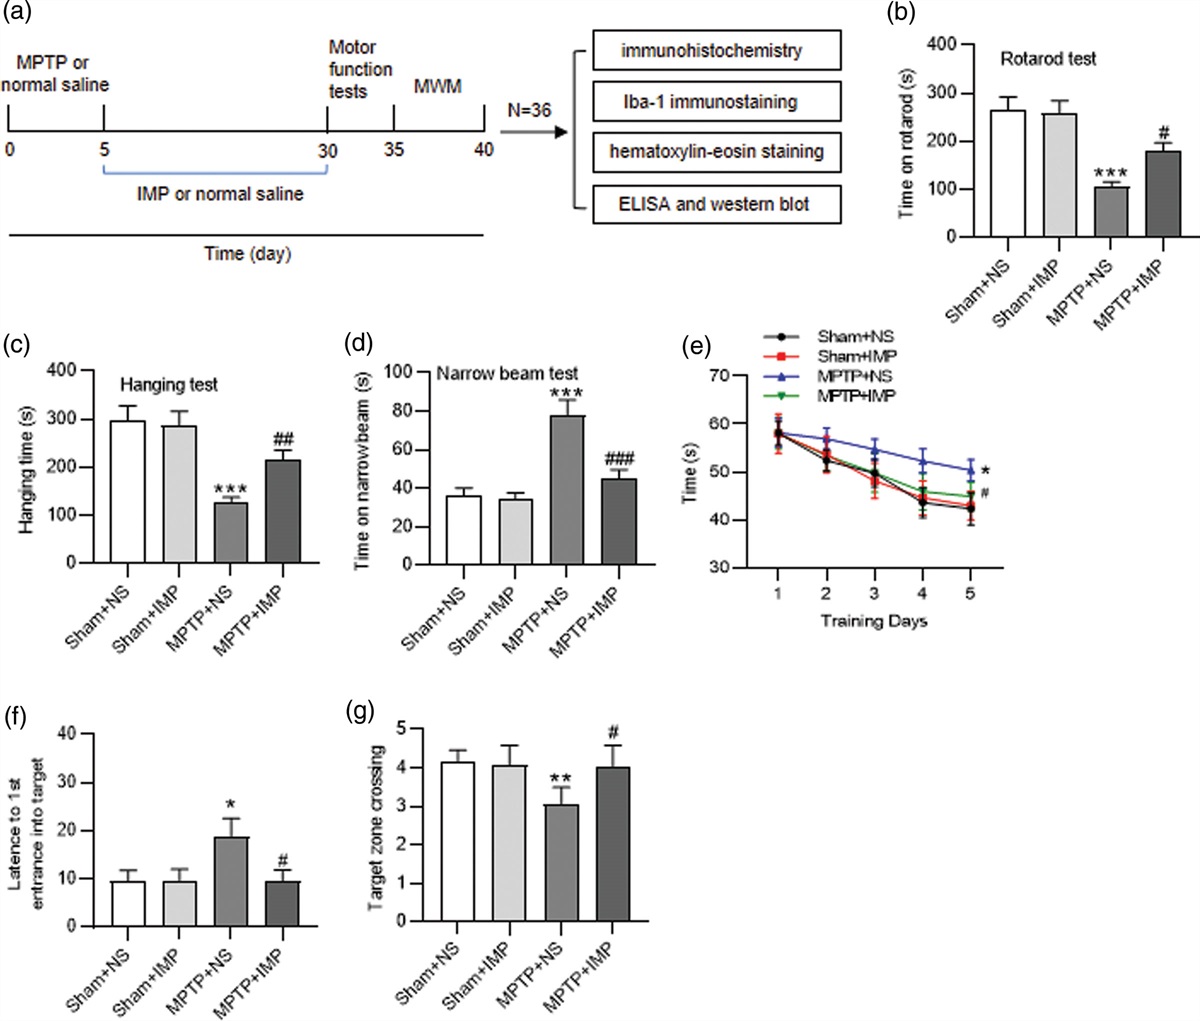 Imperatorin inhibits oxidative stress injury and neuroinflammation via the PI3K/AKT signaling pathway in the MPTP-induced Parkinson’s disease mouse